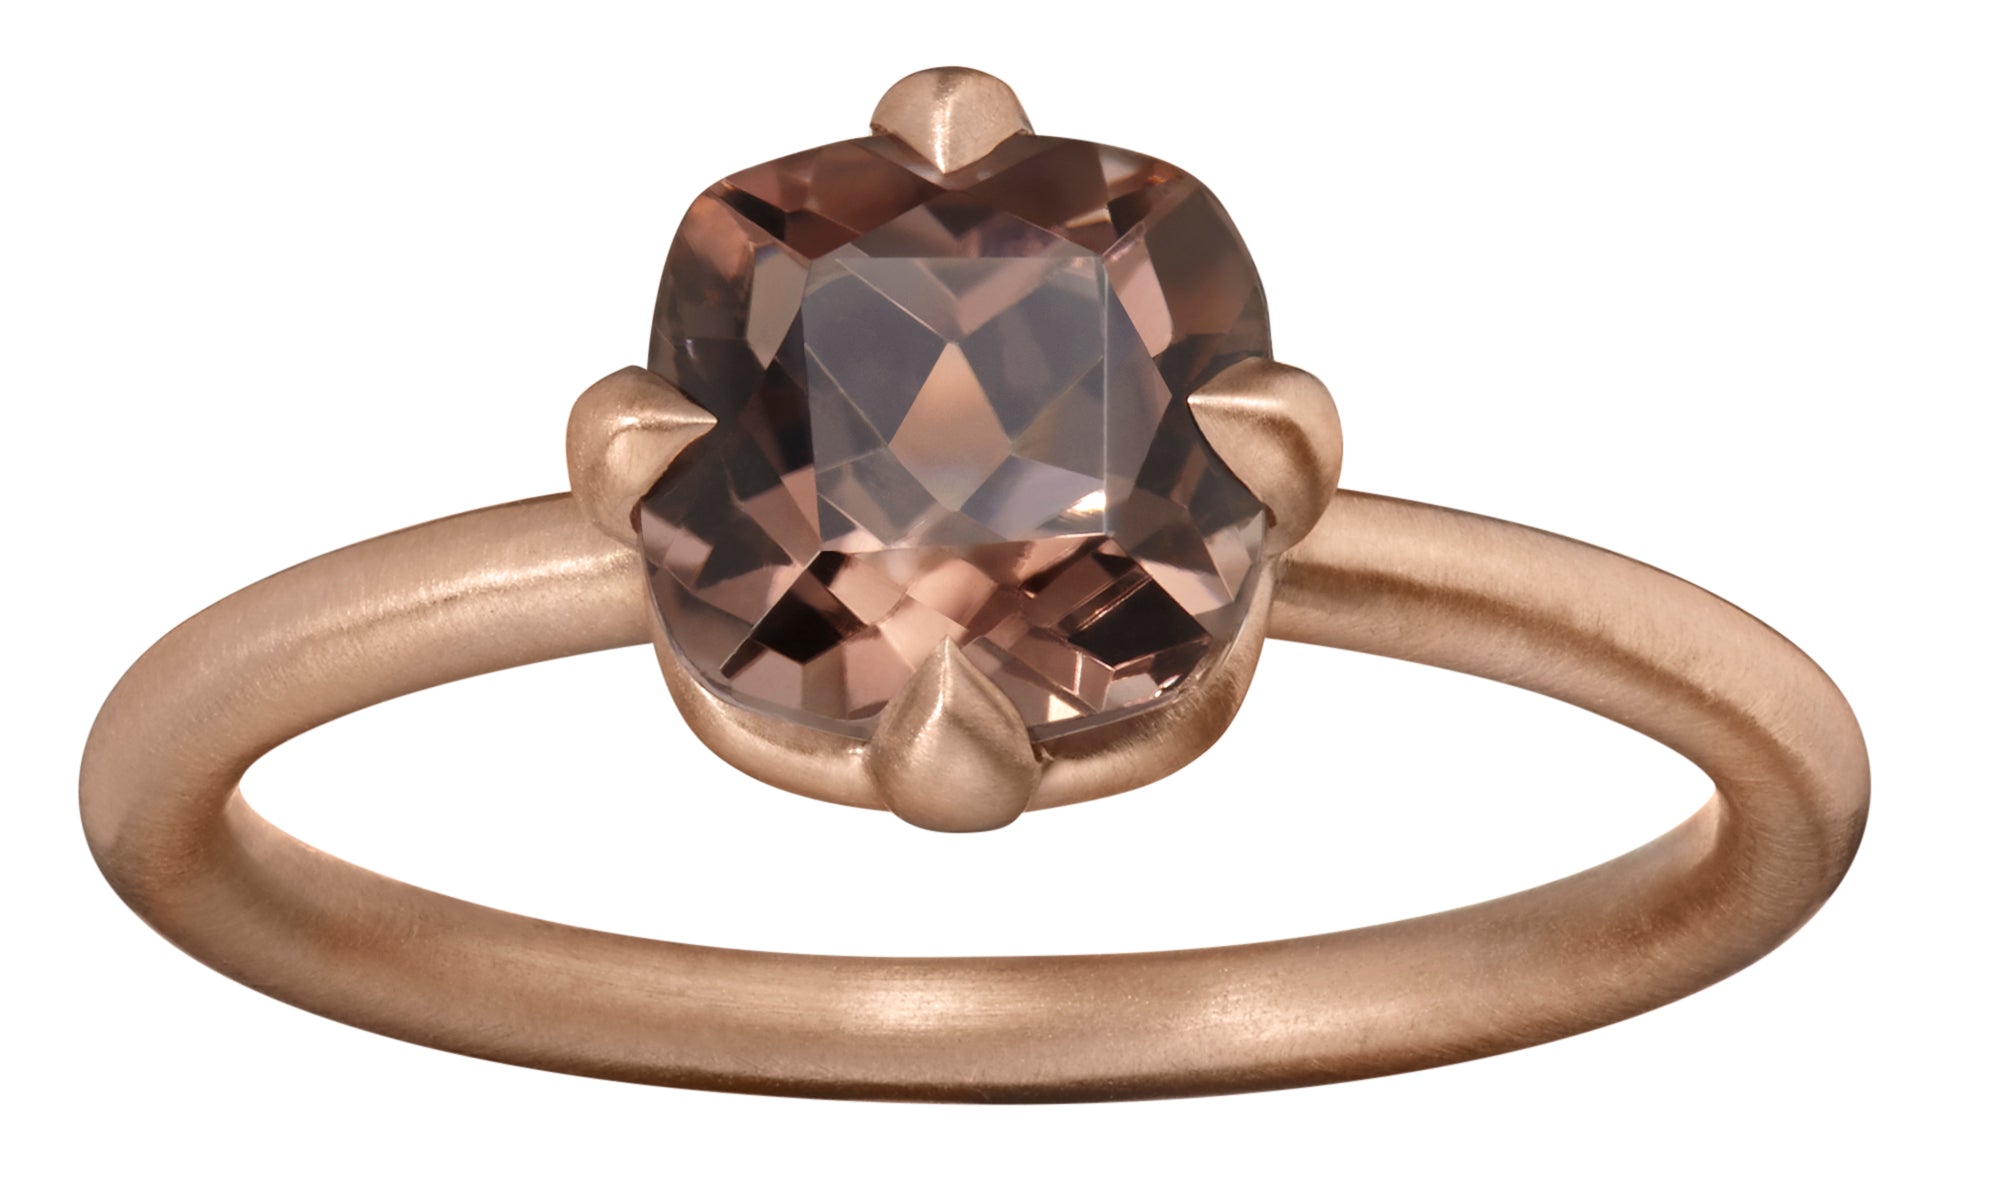 one of a kind medium sized brown chocolate tourmaline stone ring in 18k rose gold by finn by candice pool neistat